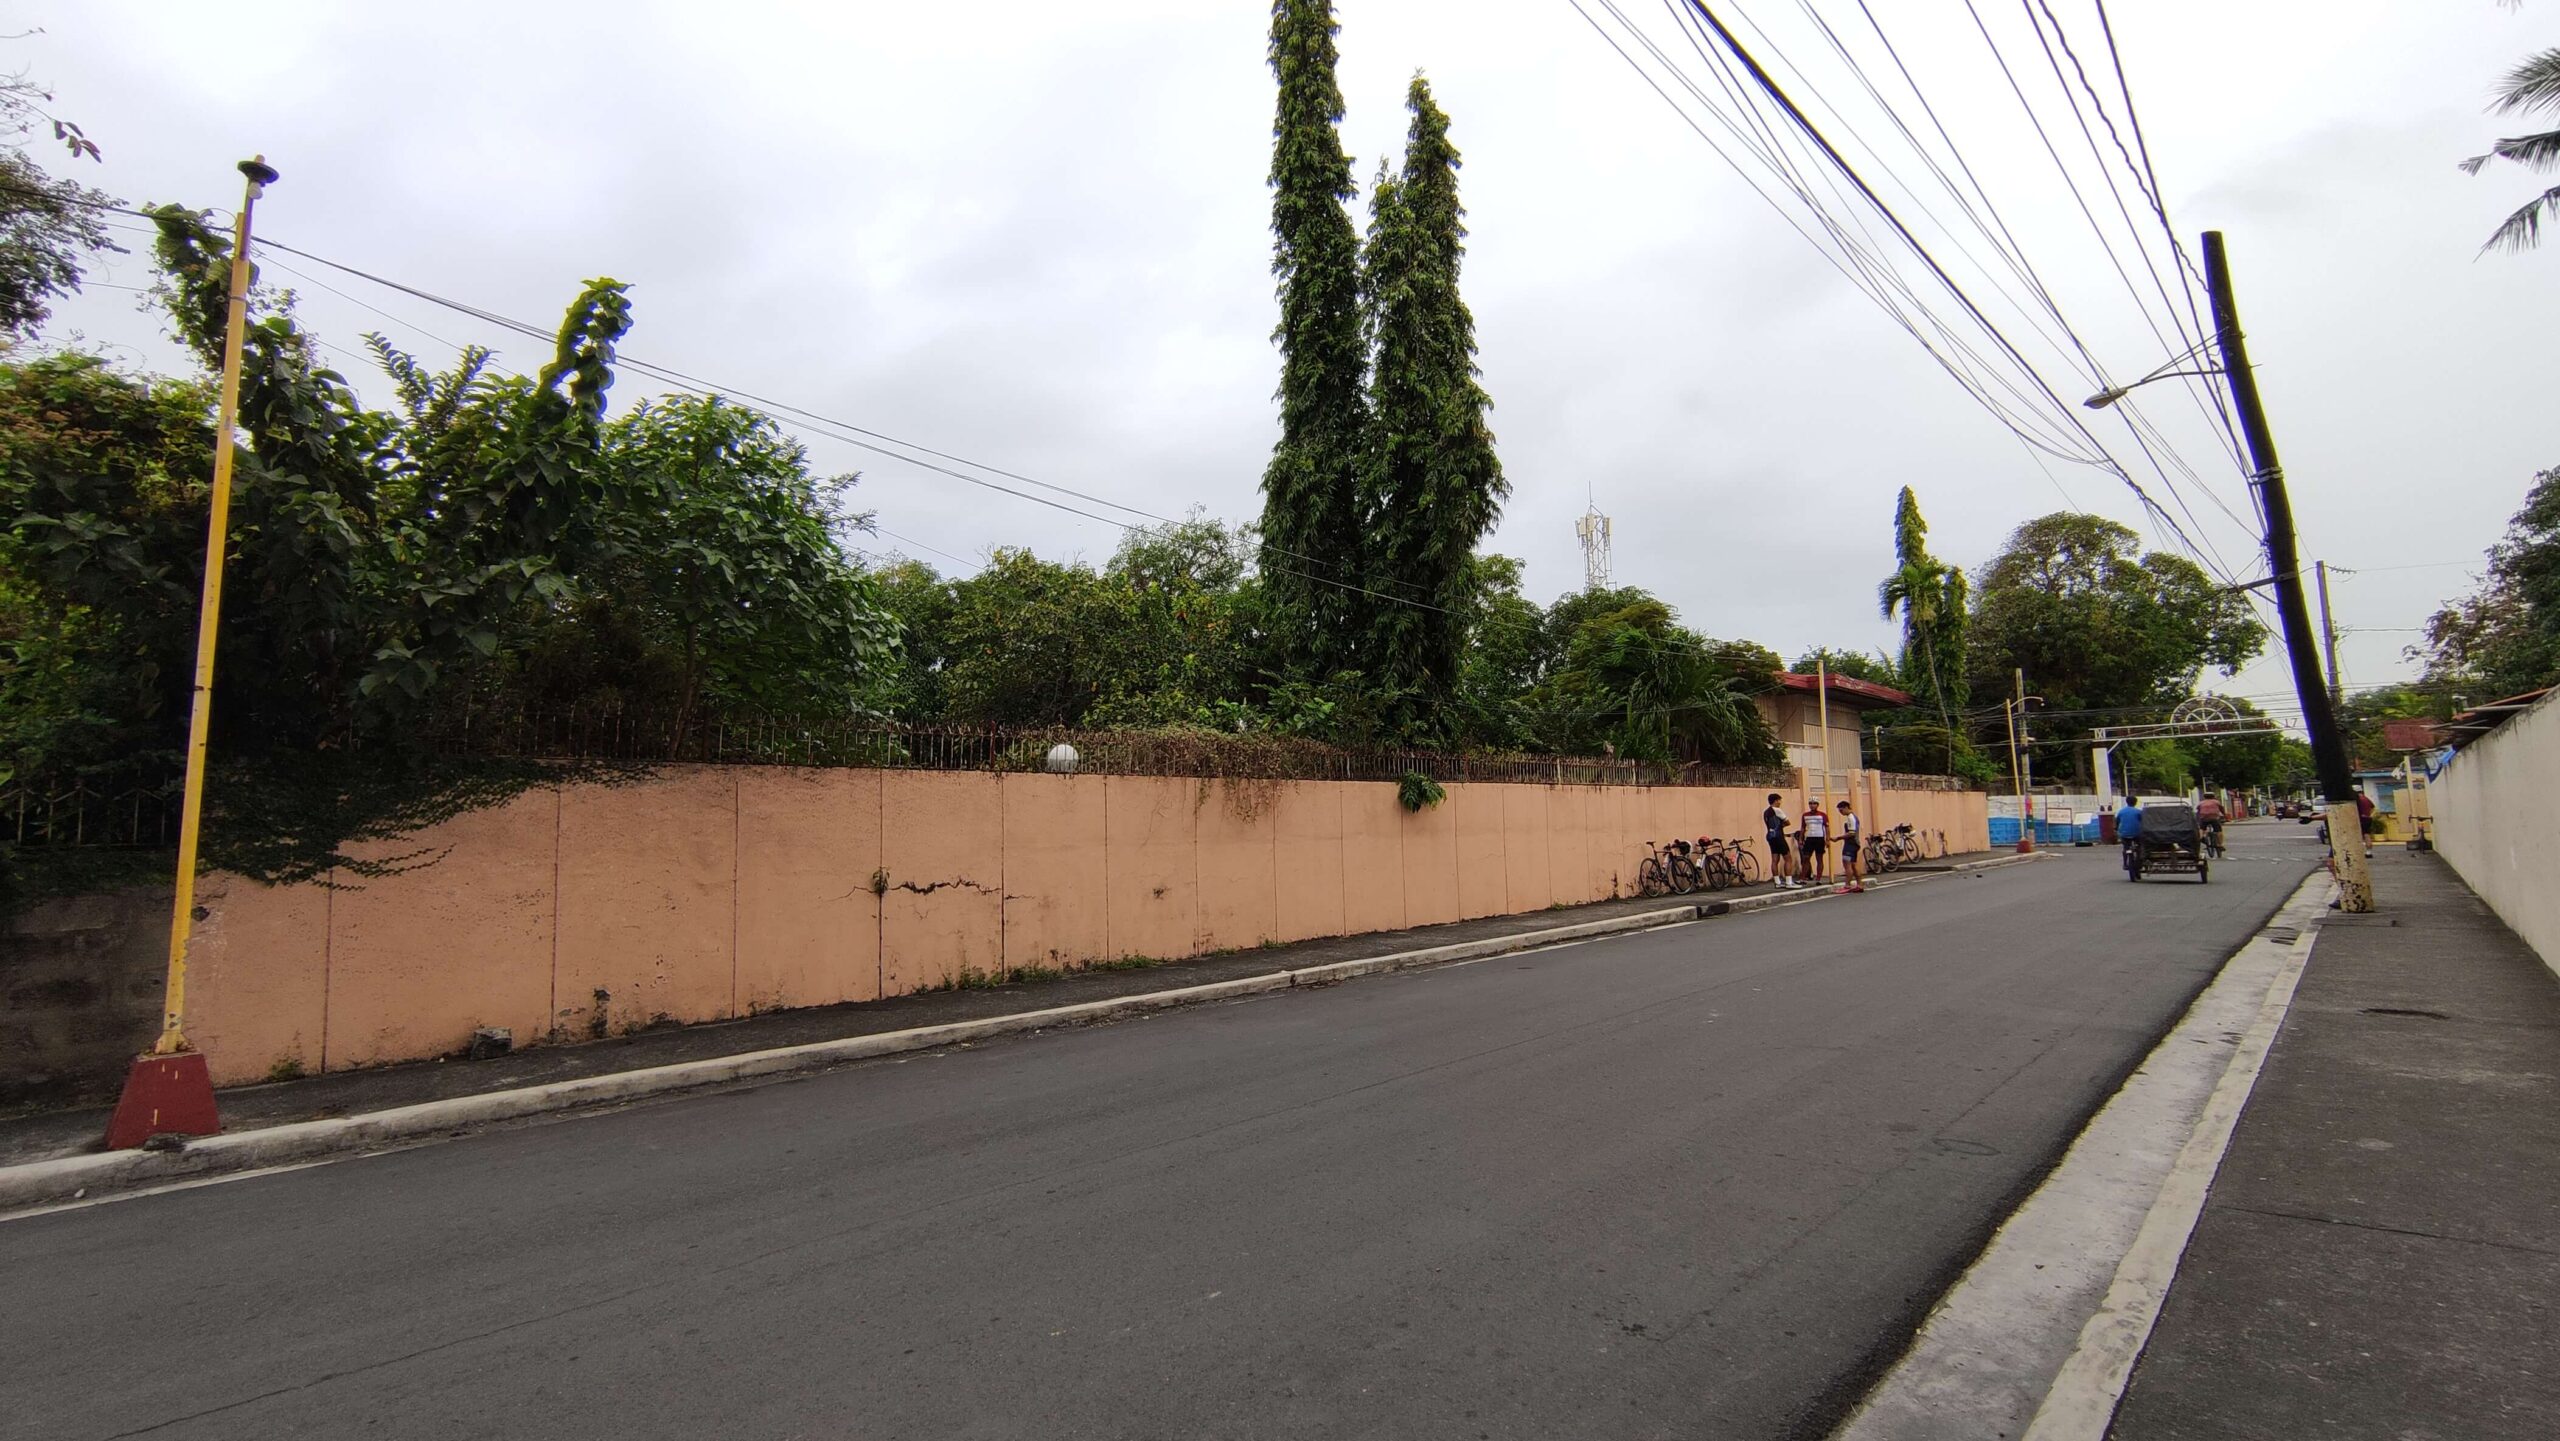 1,604sqm property with old house in Cavite City, few kms from Sangley Airport